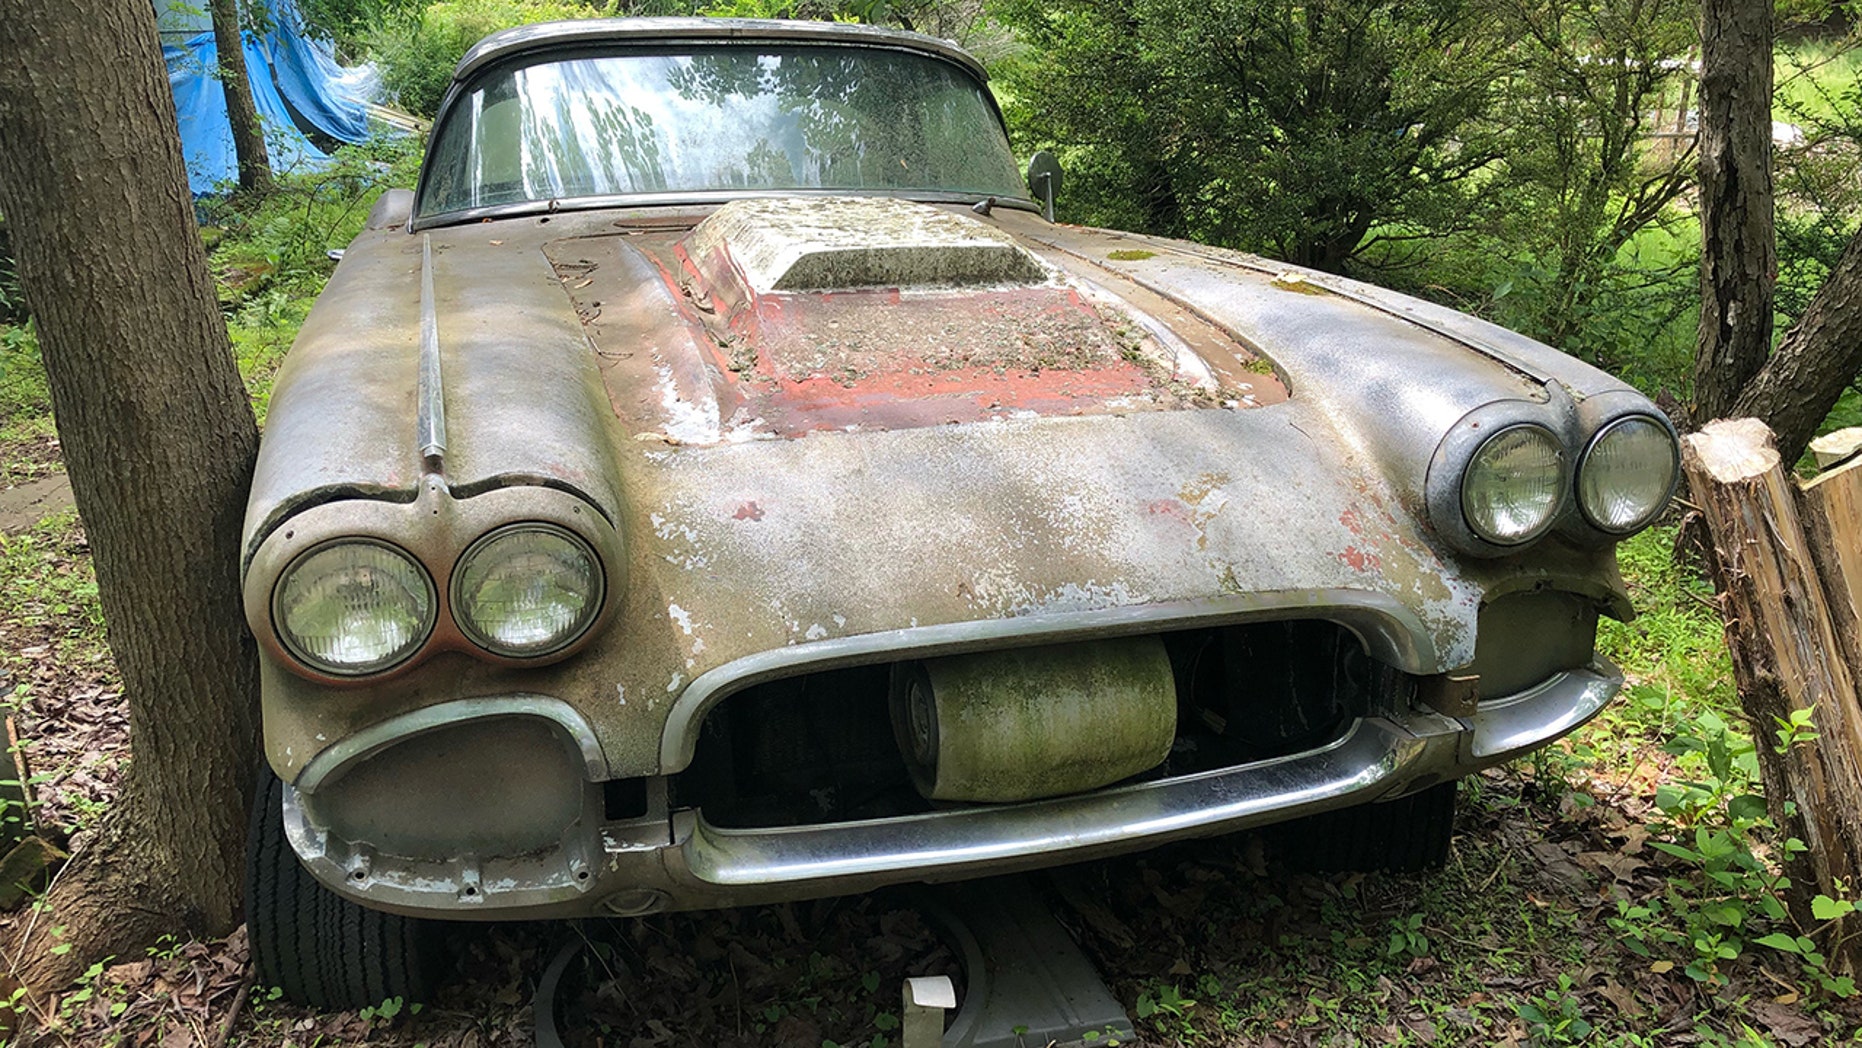 Mosscovered 1961 Chevy Corvette on Craigslist is oneofakind green